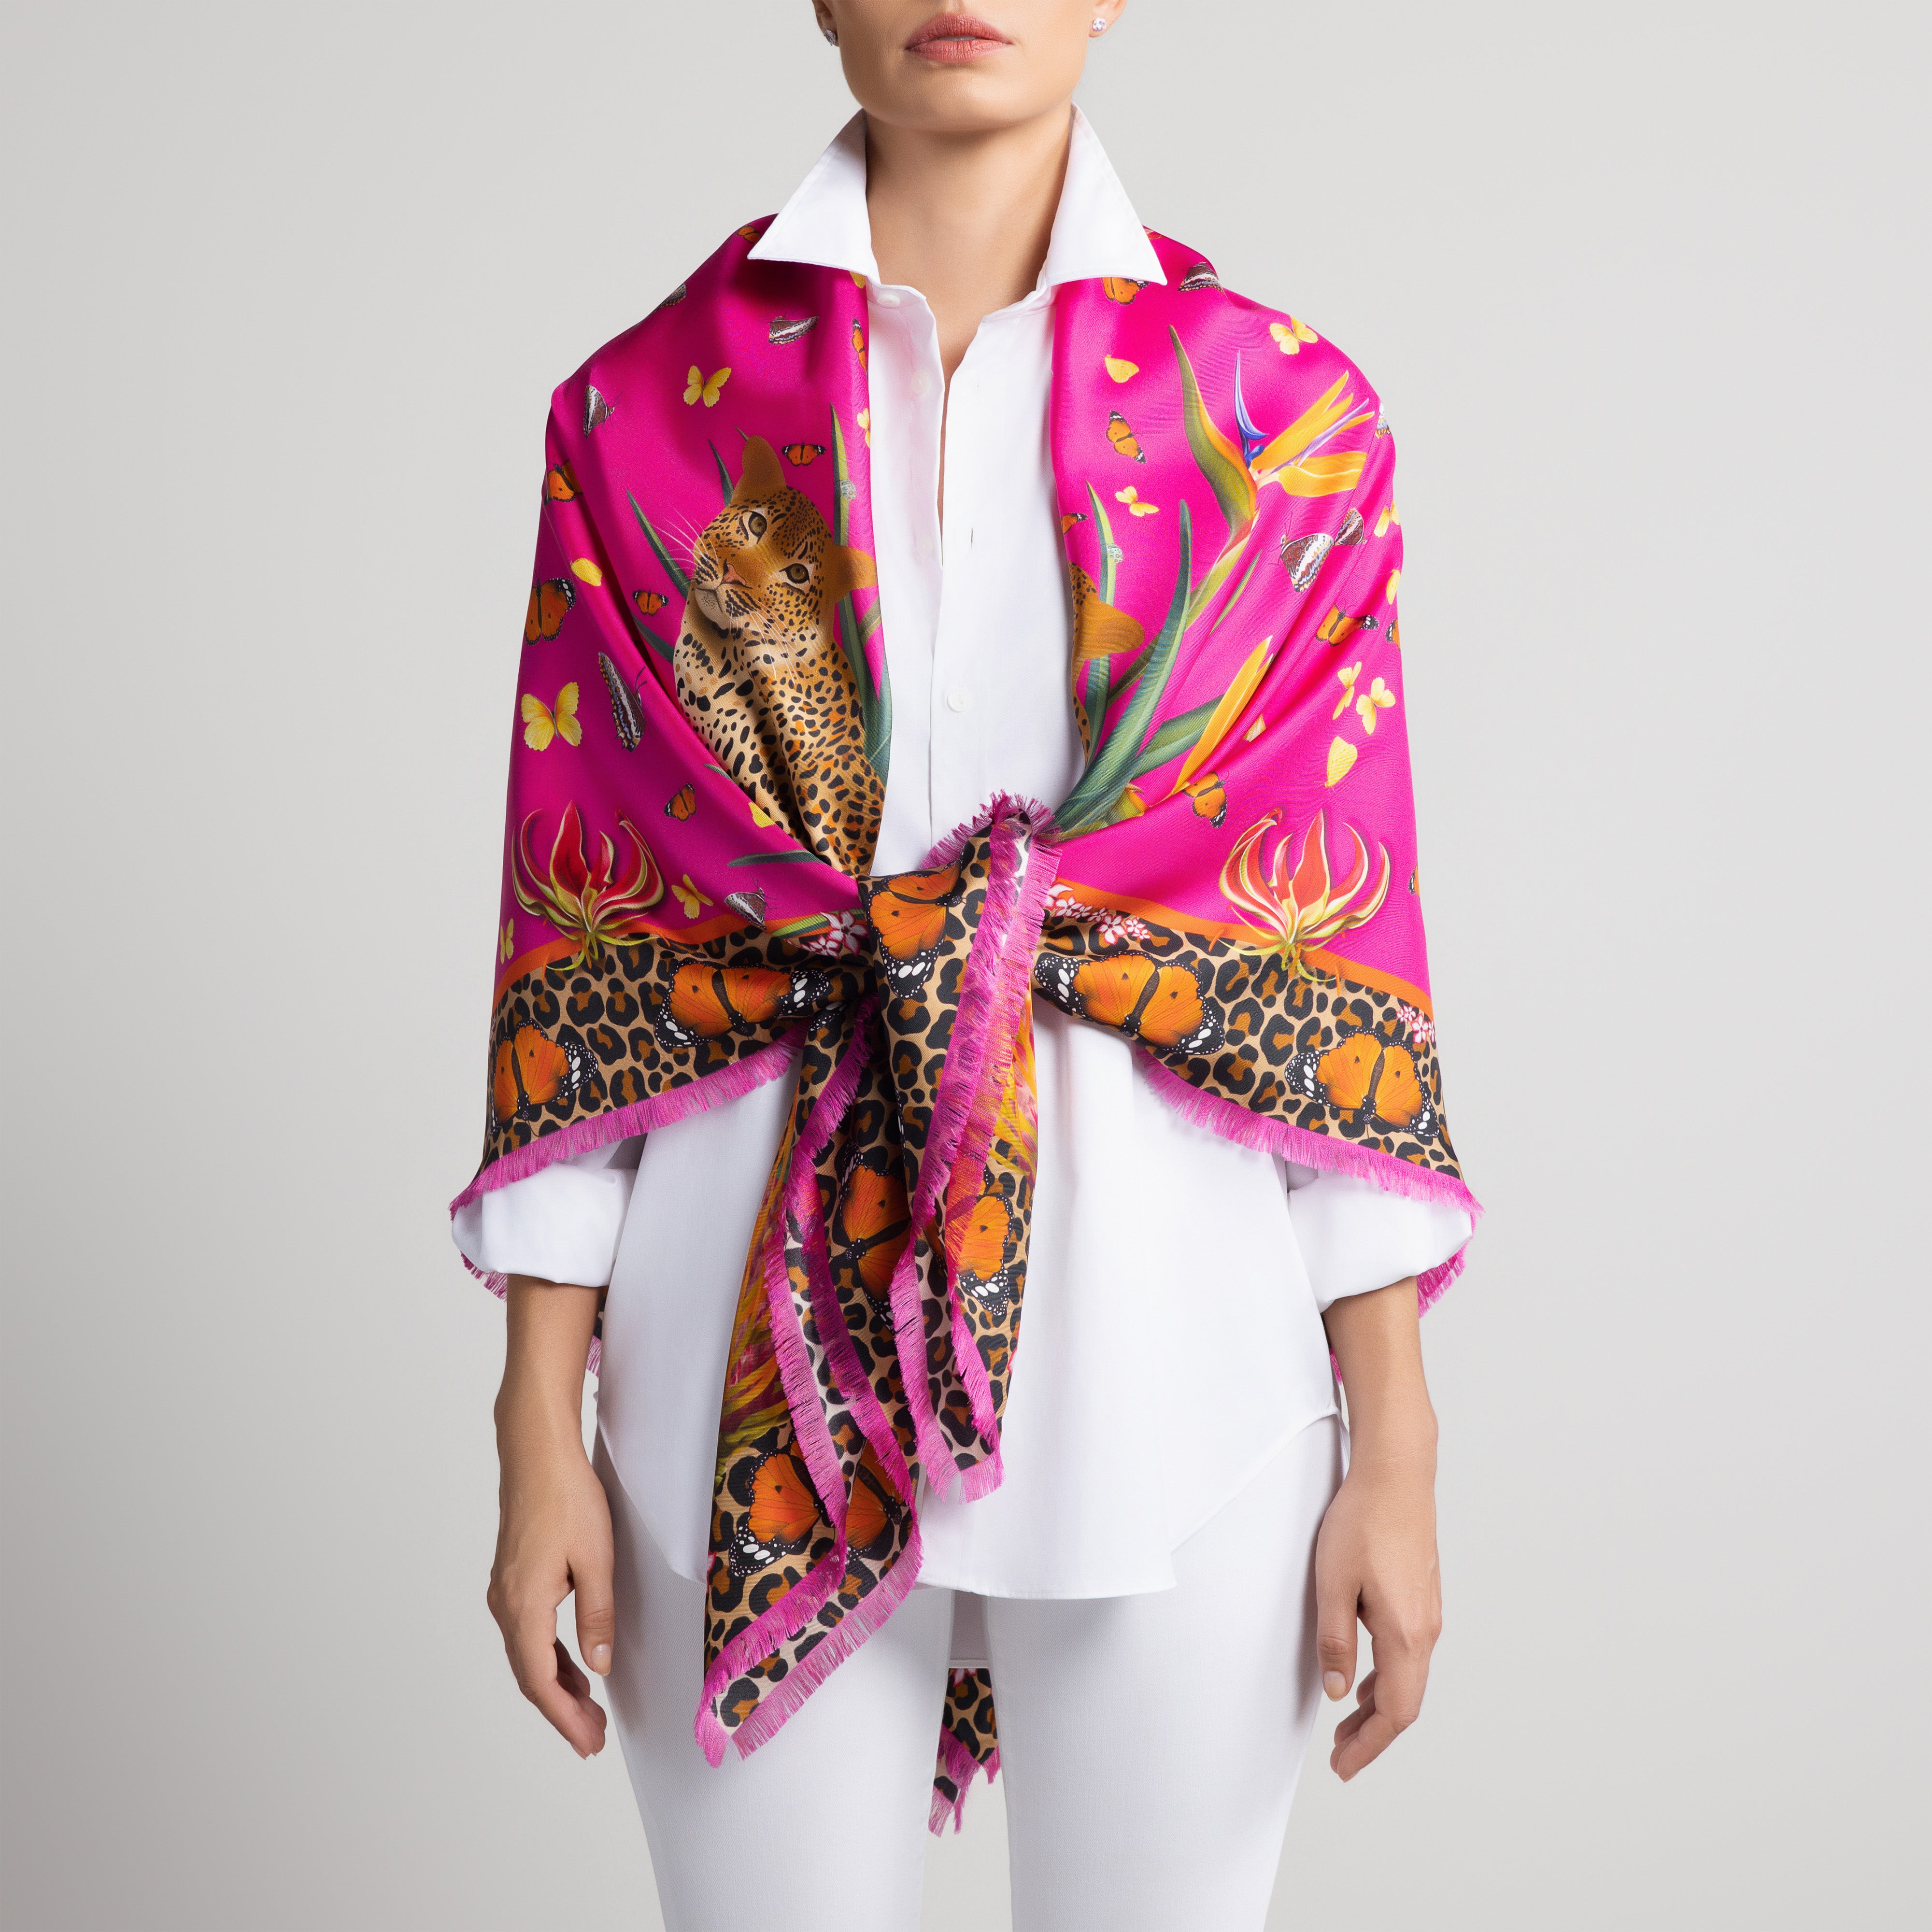 Leopard & Butterfly Grande Silk Scarf in Hot Pink with Hand-Feathered Edges